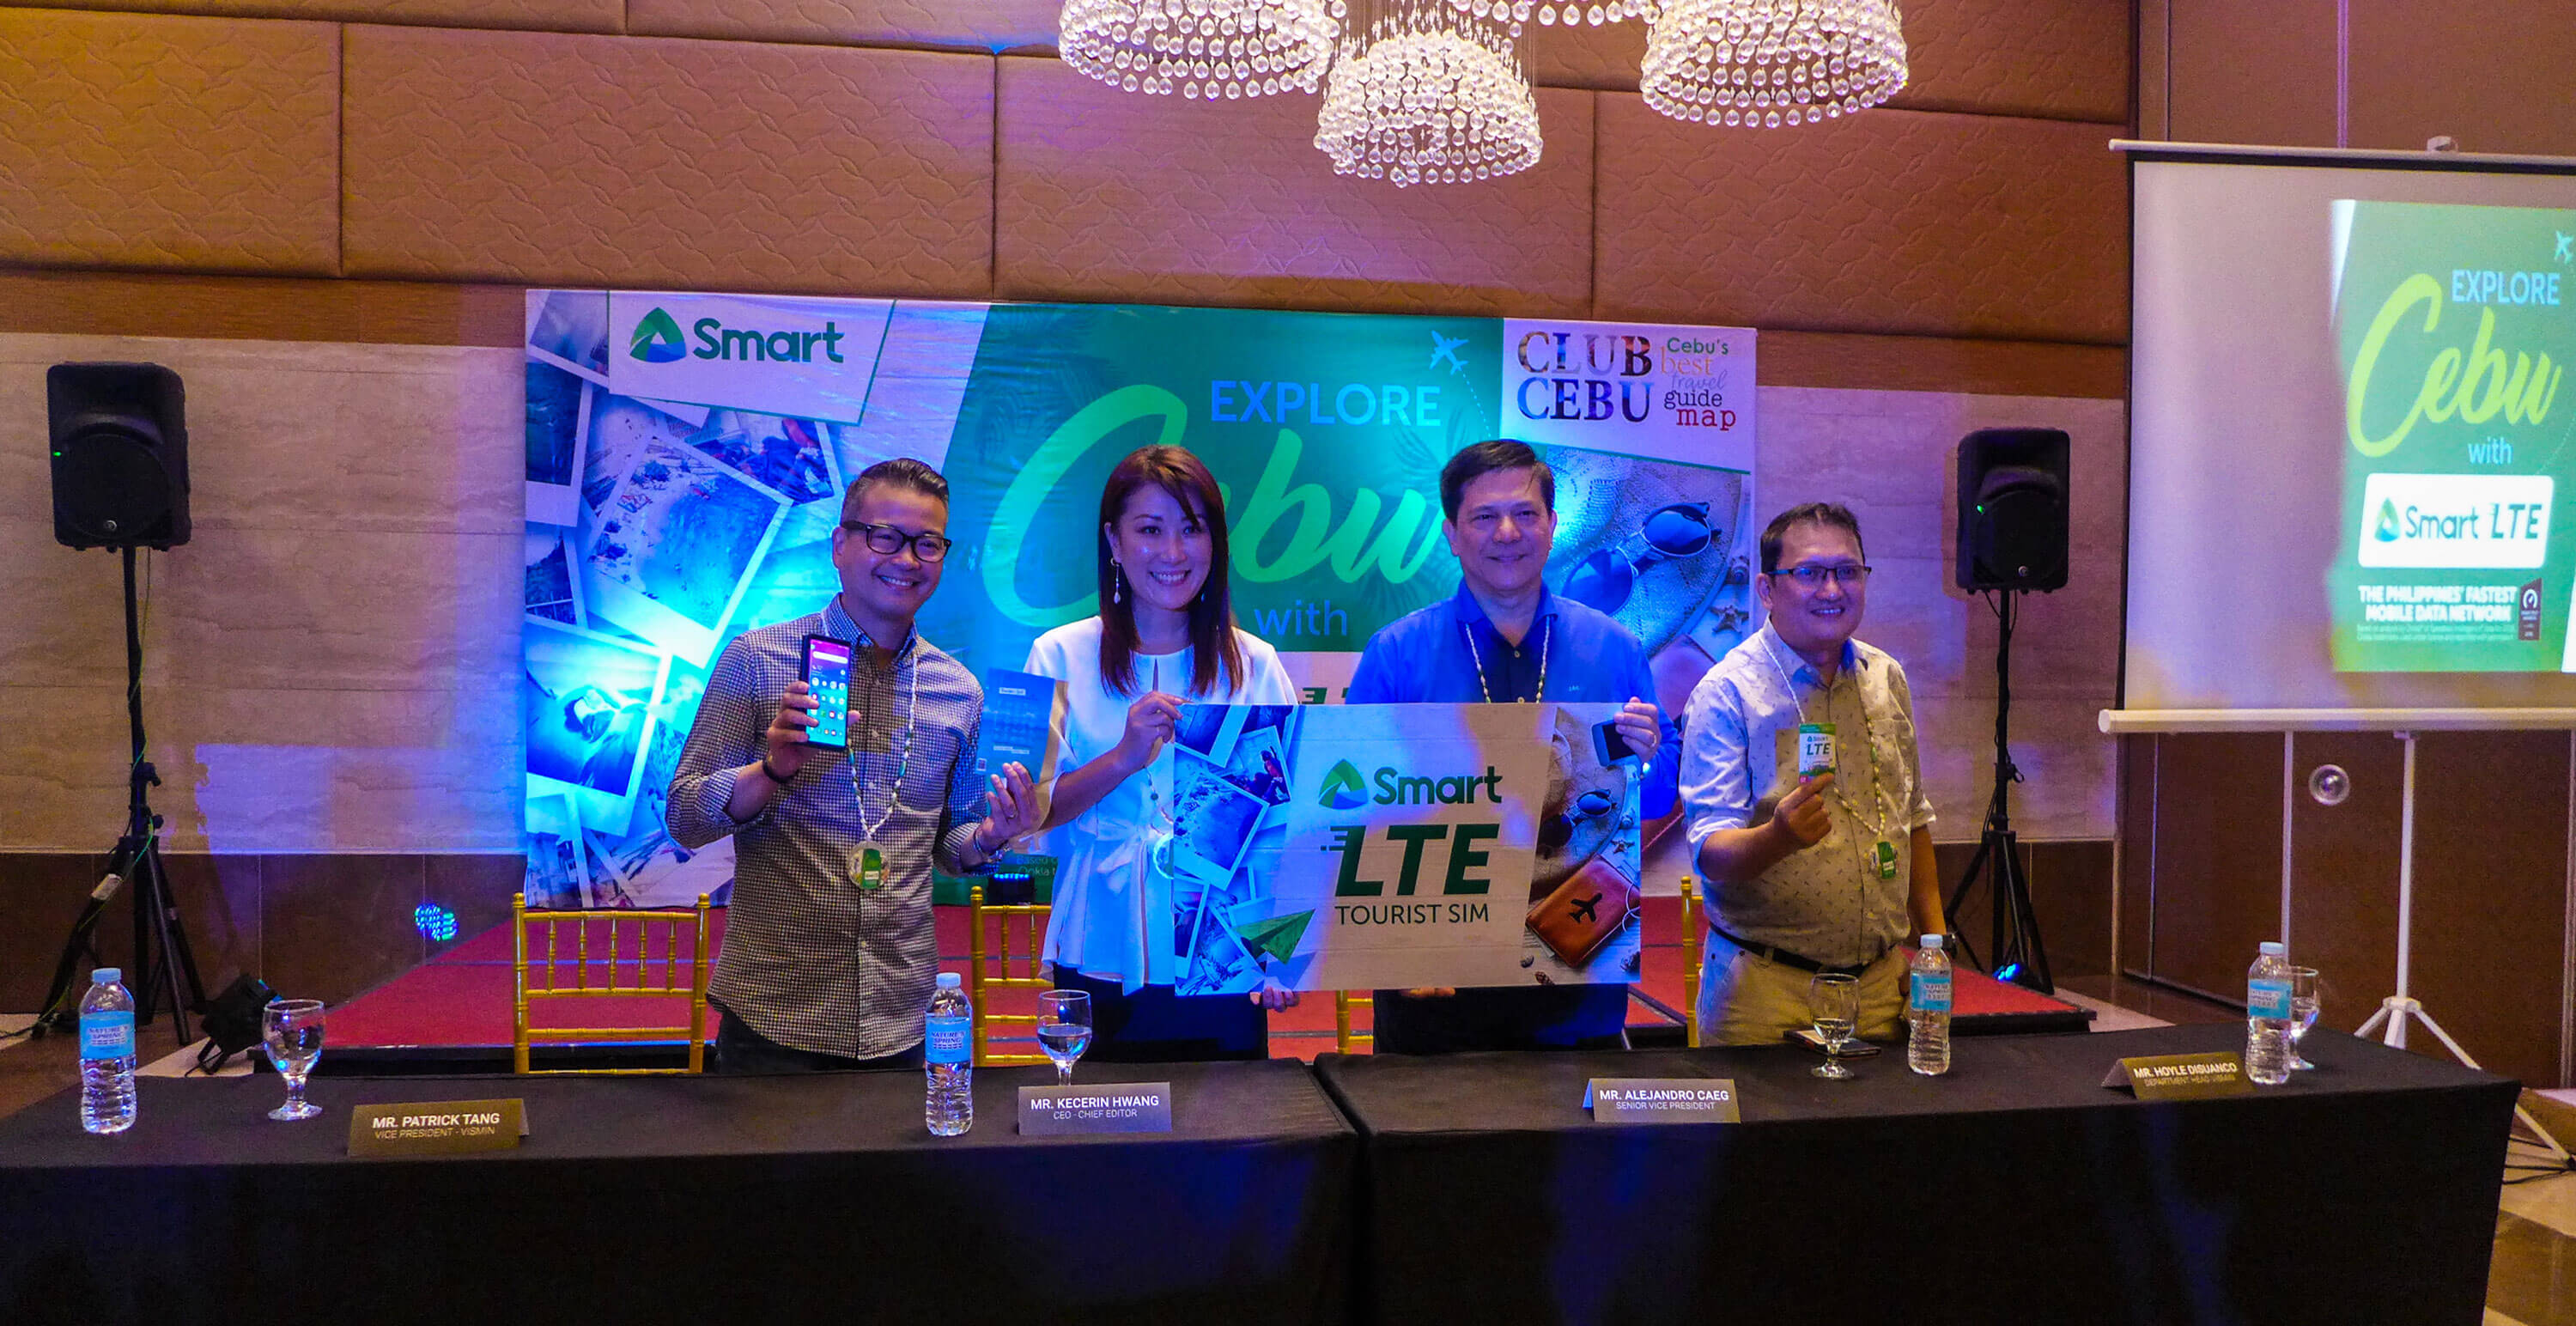 WELCOME KIT, TOURIST SIM. (From left) Patrick Tang, Smart Vice President and Head of Visayas-Mindanao Regional Marketing; Kecerin Hwang, Club Cebu Chief Editor; Alejandro Caeg, Smart Senior Vice President and Head of Consumer Business for Customer Development; and Hoyle Disuanco, Smart VisMin Regional Sales and Distribution Head during the signing of the agreement.